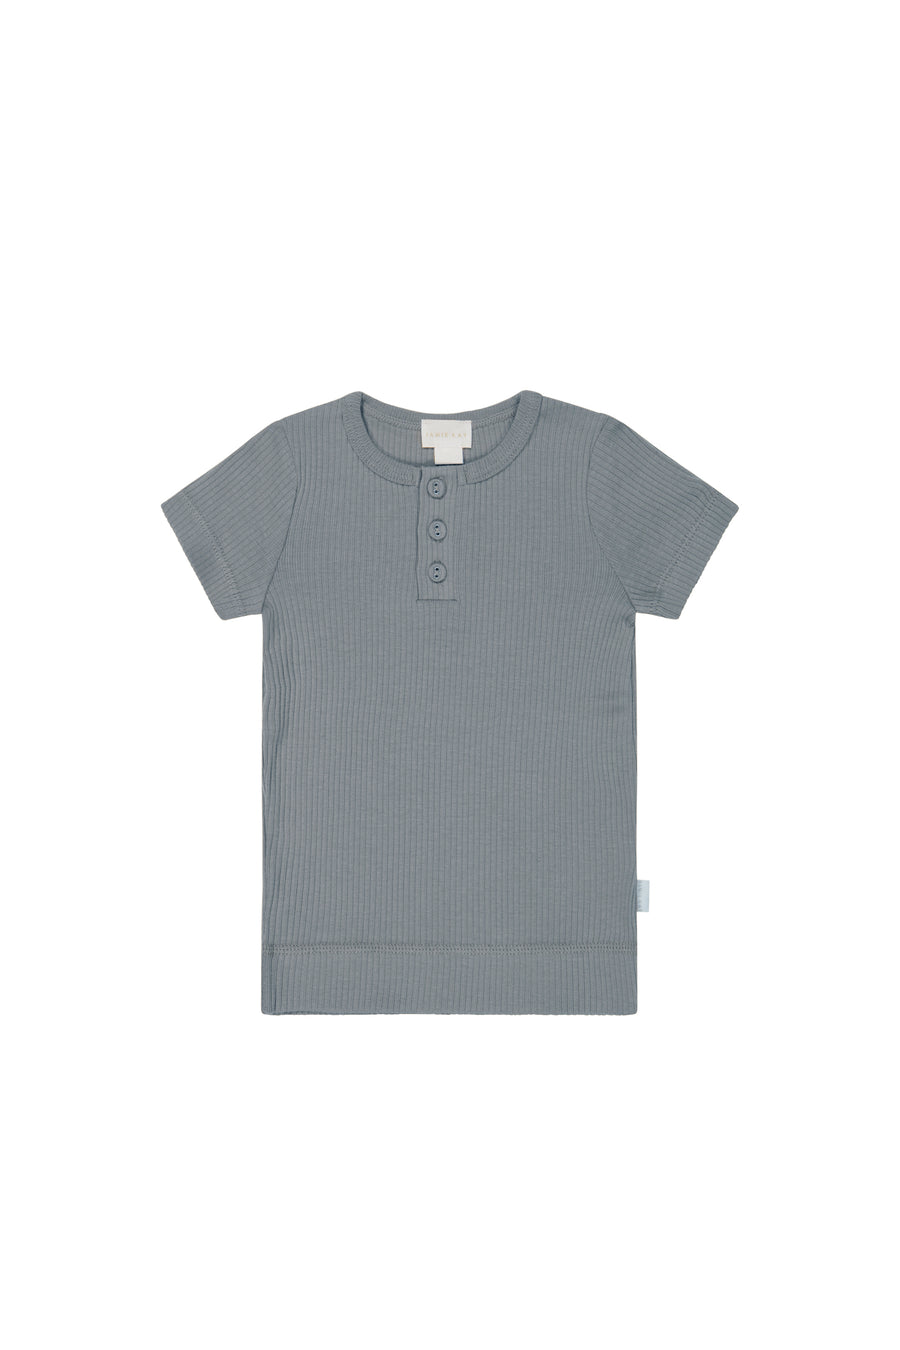 Organic Cotton Modal Henley Tee - Pebble Childrens Top from Jamie Kay NZ